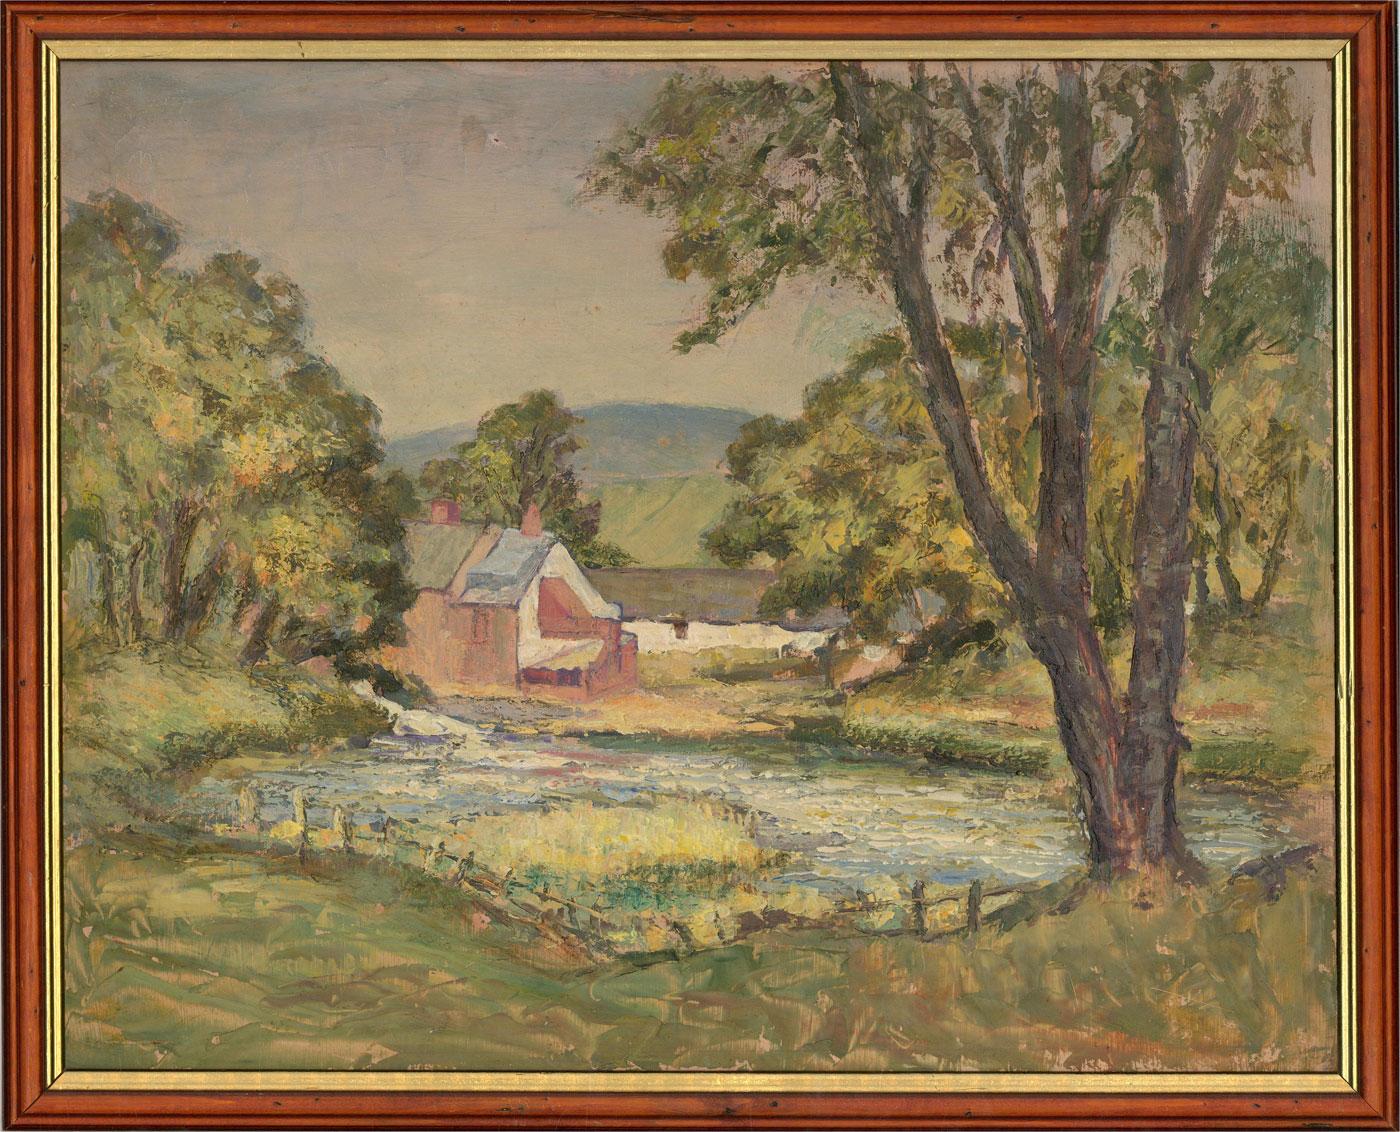 Unknown Landscape Painting - 20th Century Oil - Countryside View with Pond